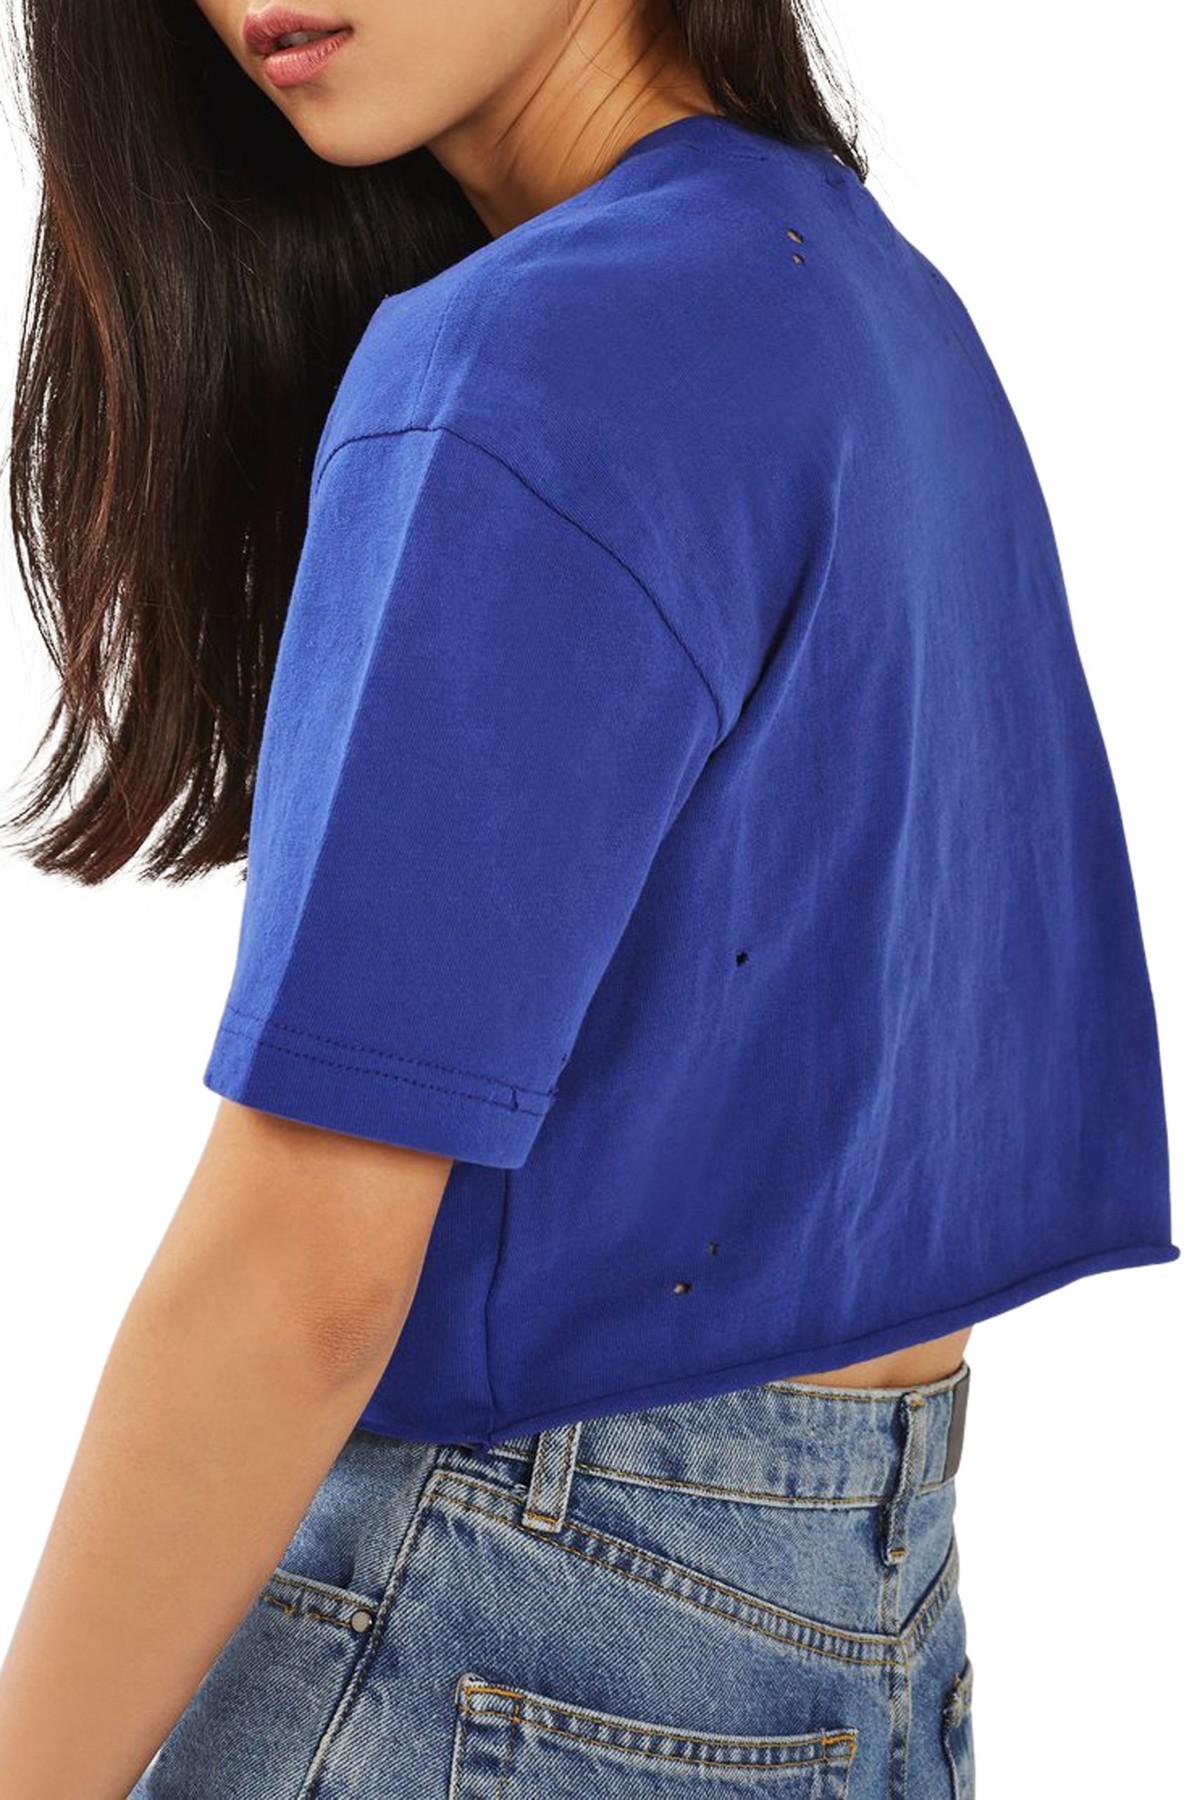 TOPSHOP New York Knicks Crop Top By Unk X in Blue | Lyst